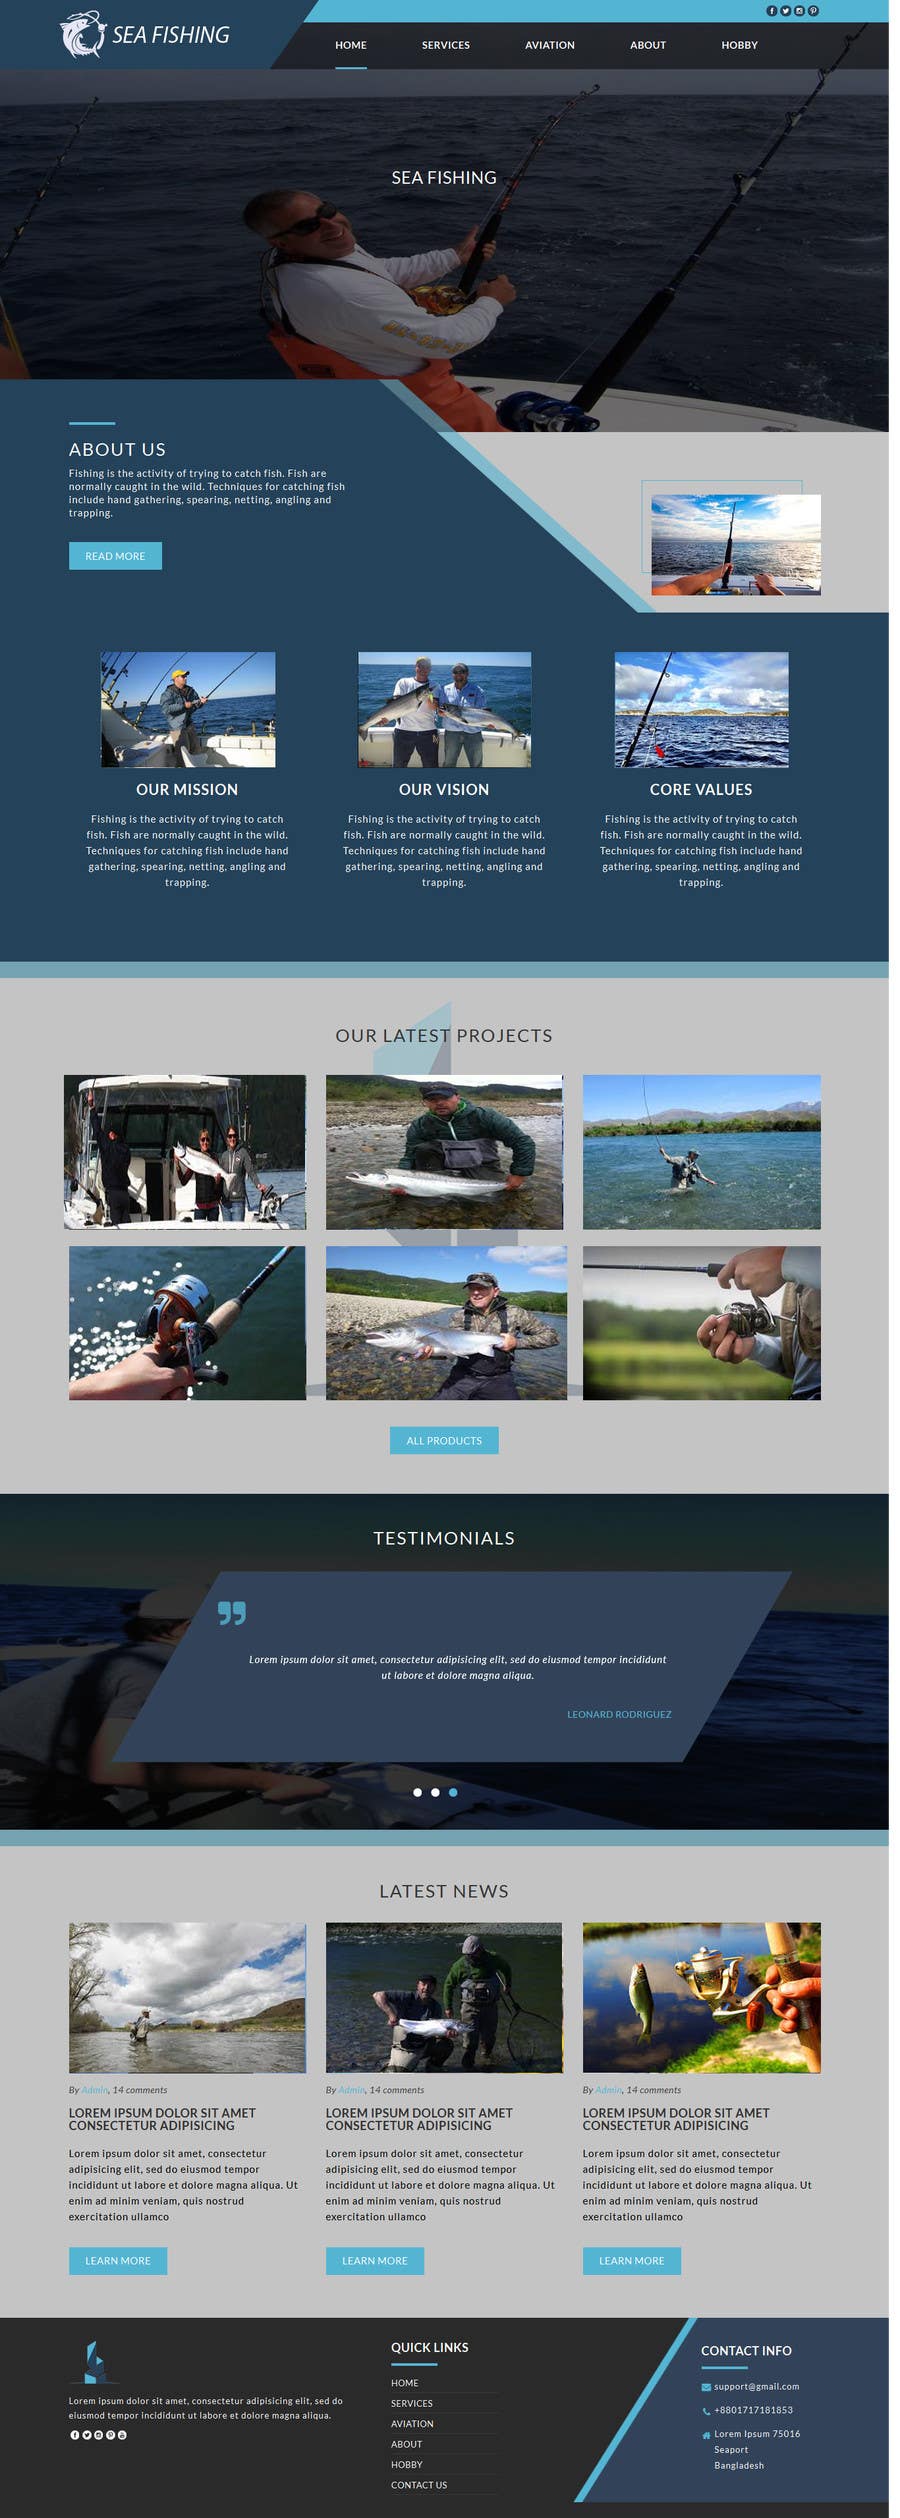 Konkurrenceindlæg #5 for                                                 Design a Website Template with a Fishing Theme
                                            